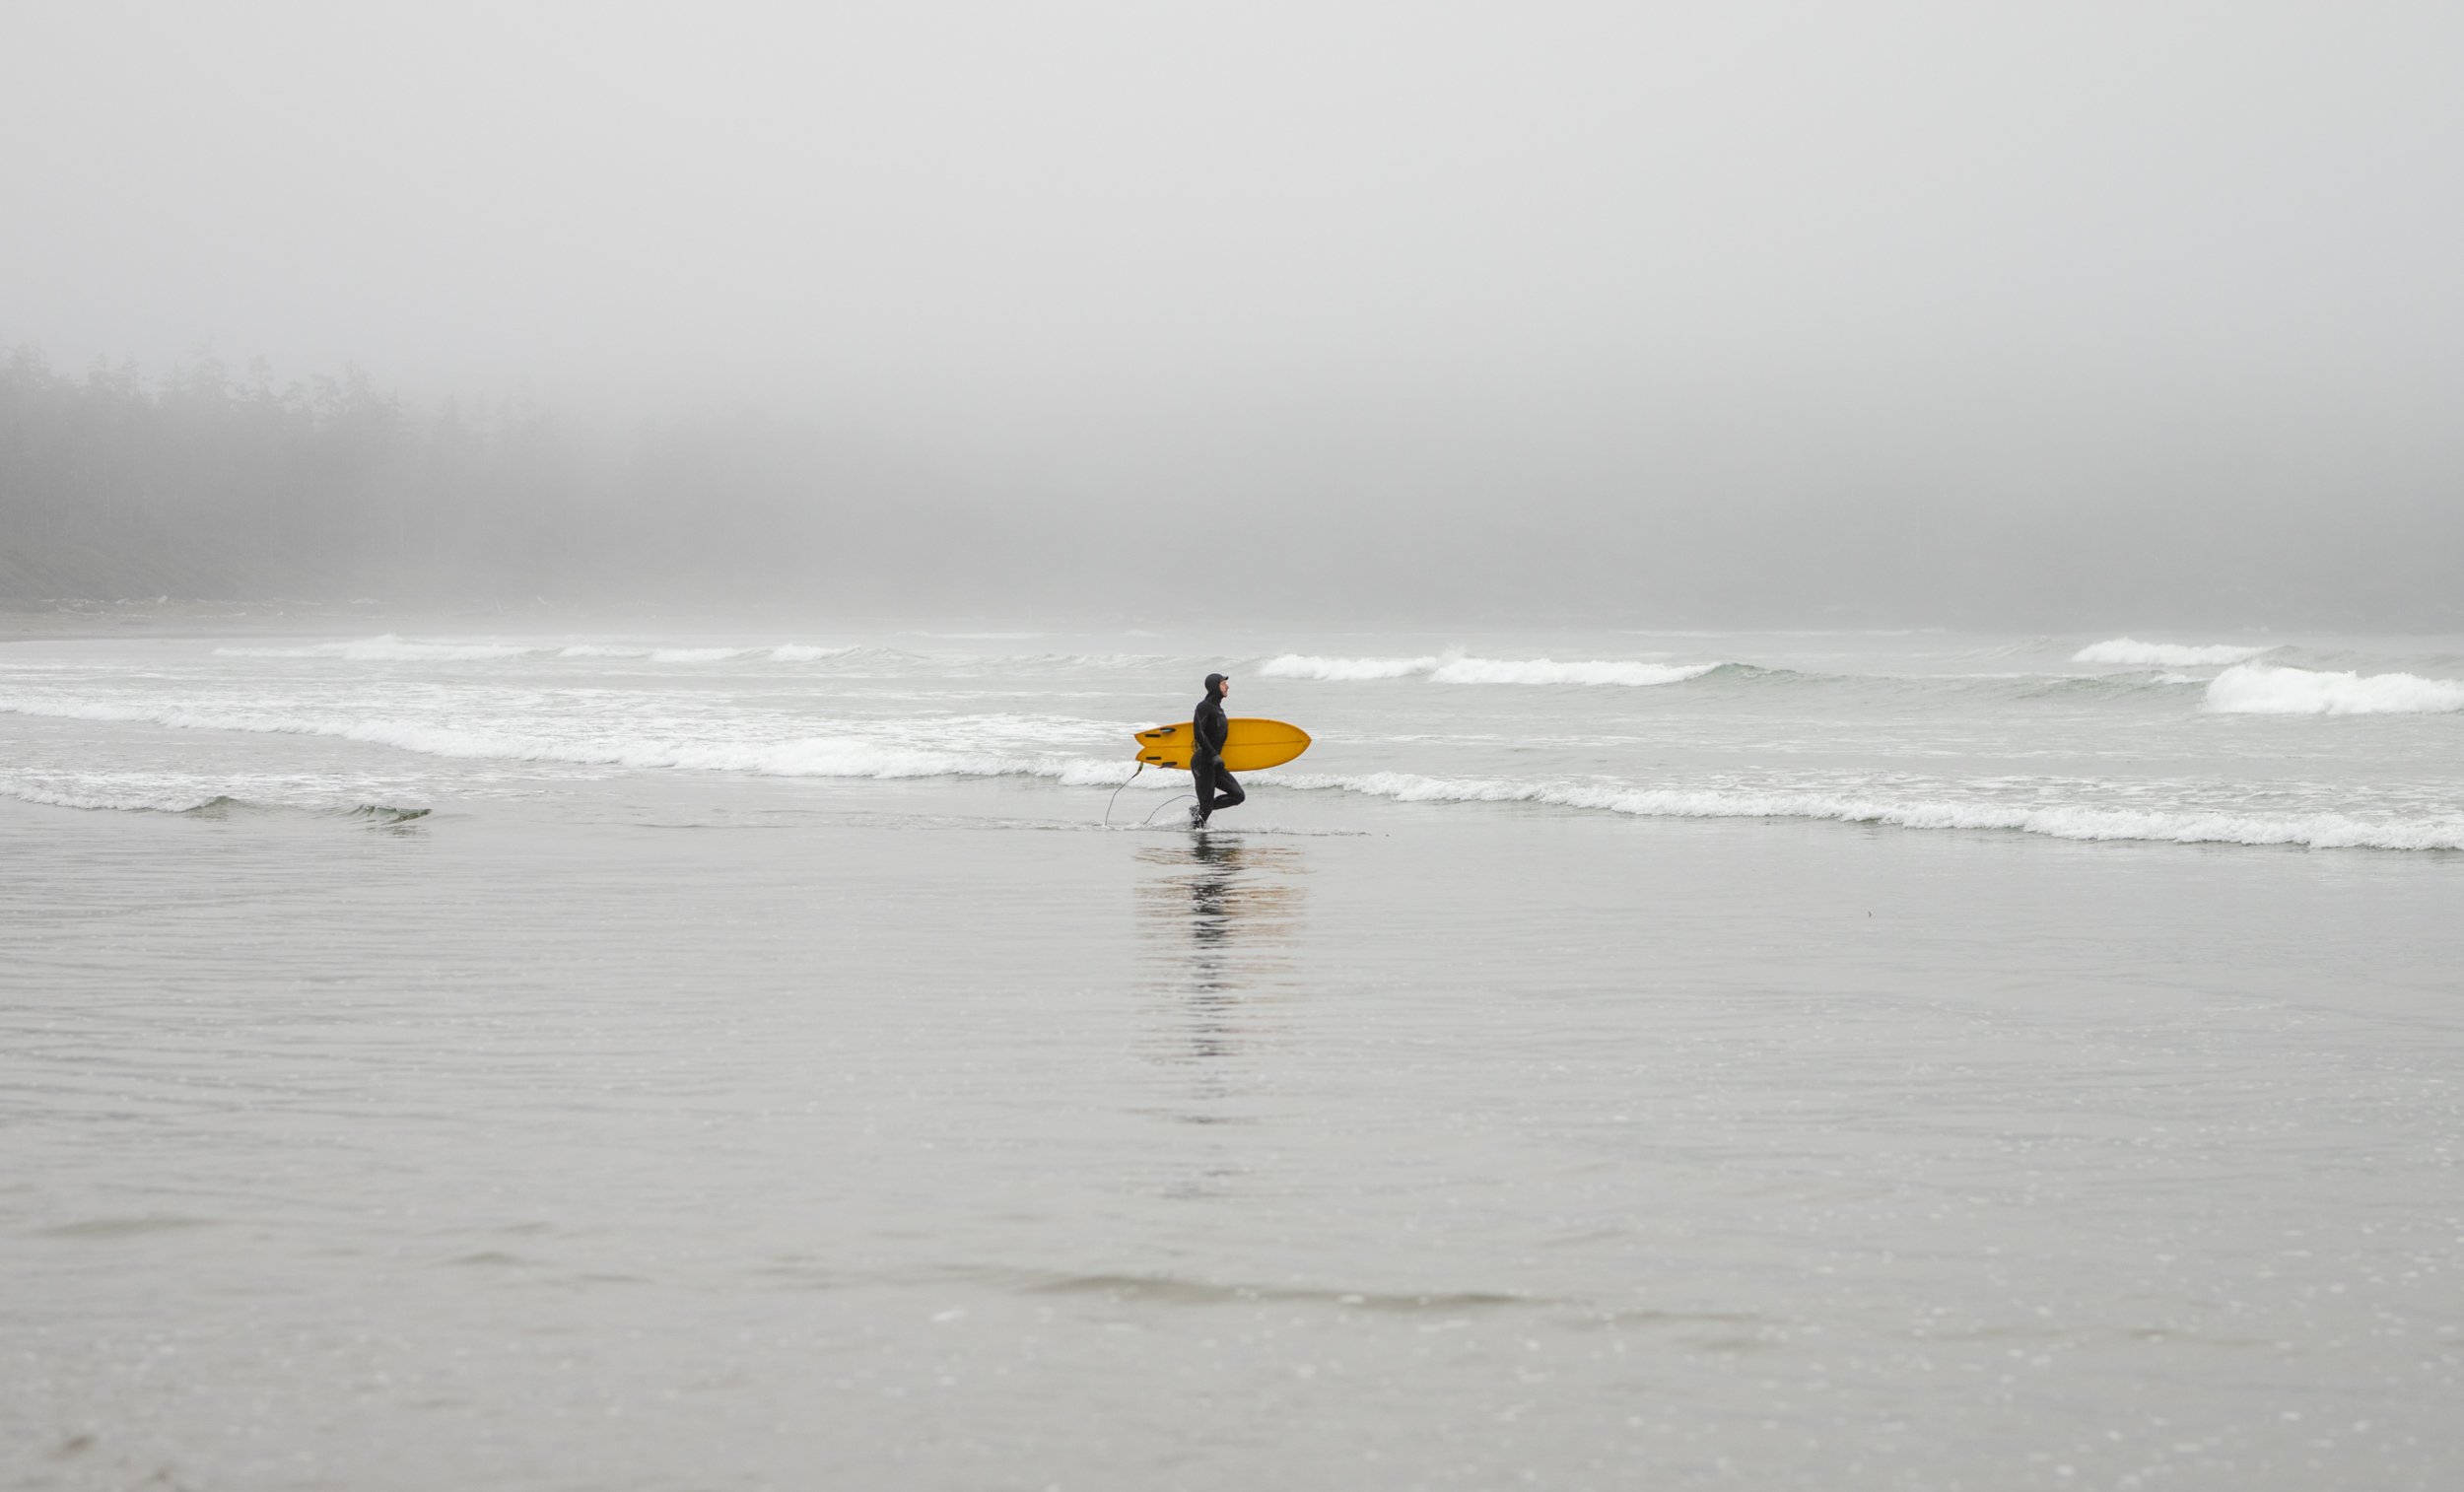  A foggy ocean scene when a surfer with a bright yellow surf board makes his way out to the ocean for an early morning surf 